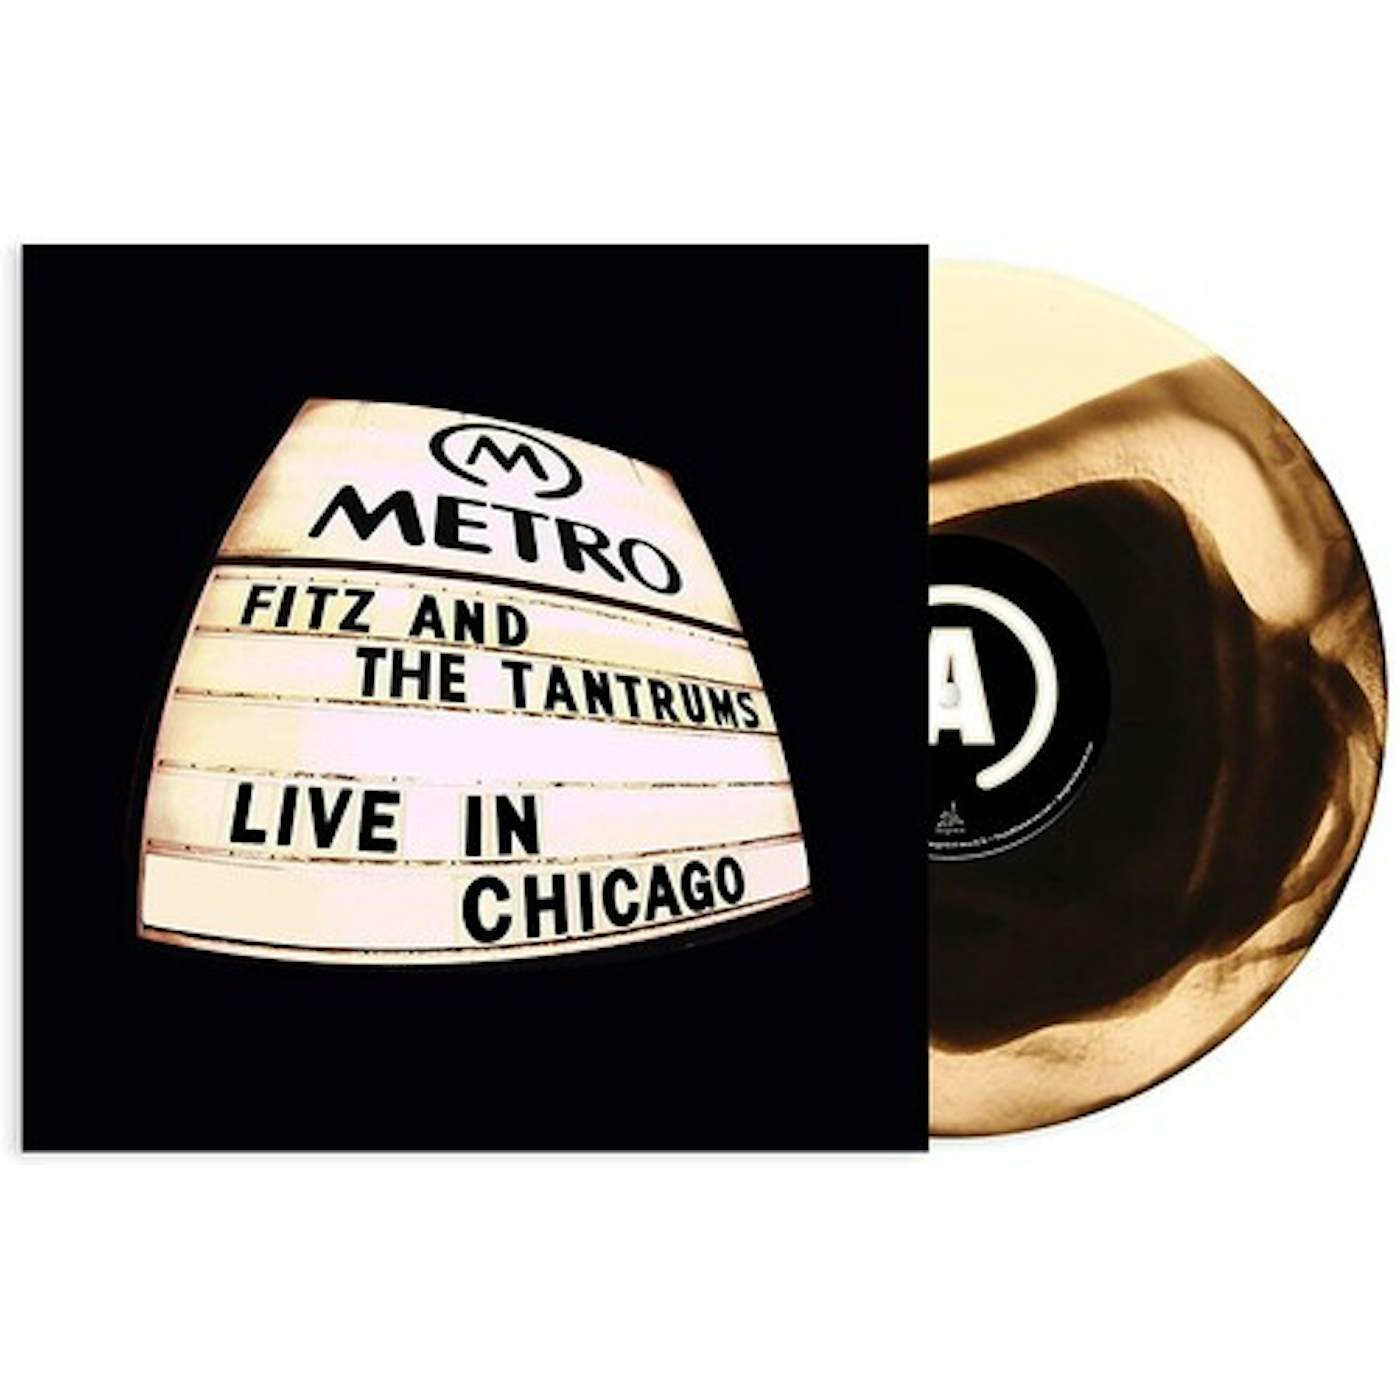 Fitz and The Tantrums Live In Chicago Vinyl Record